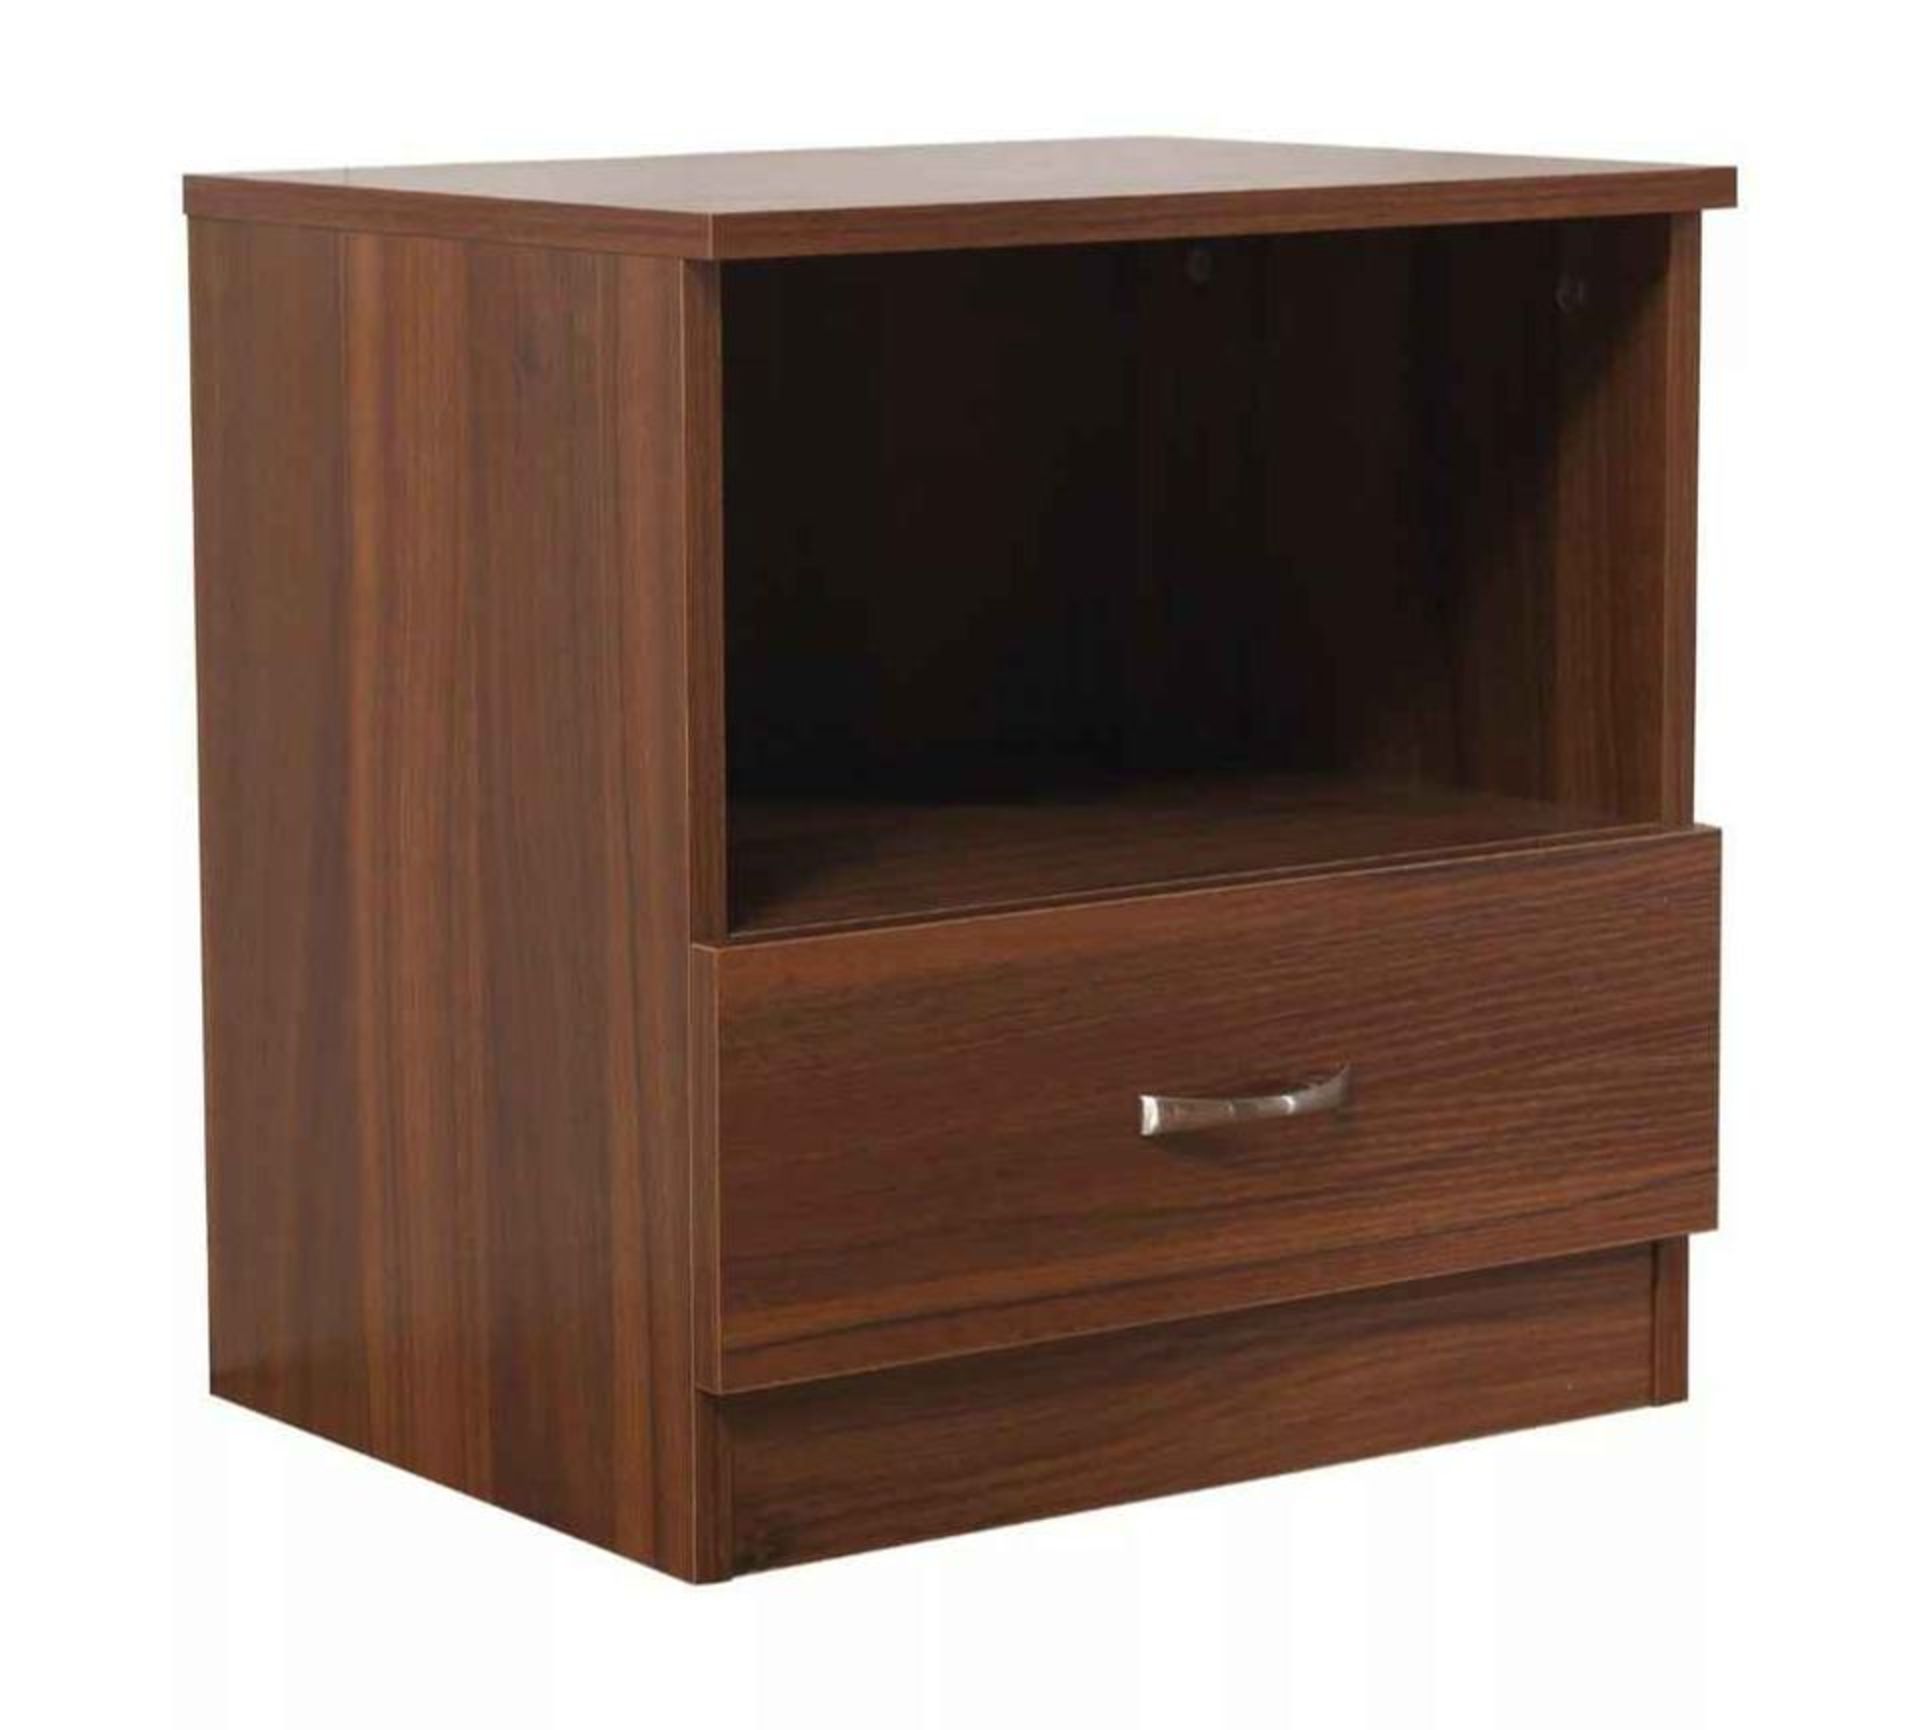 WALNUT BEDSIDE CABINET BRAND NEW BOXED - Image 2 of 3